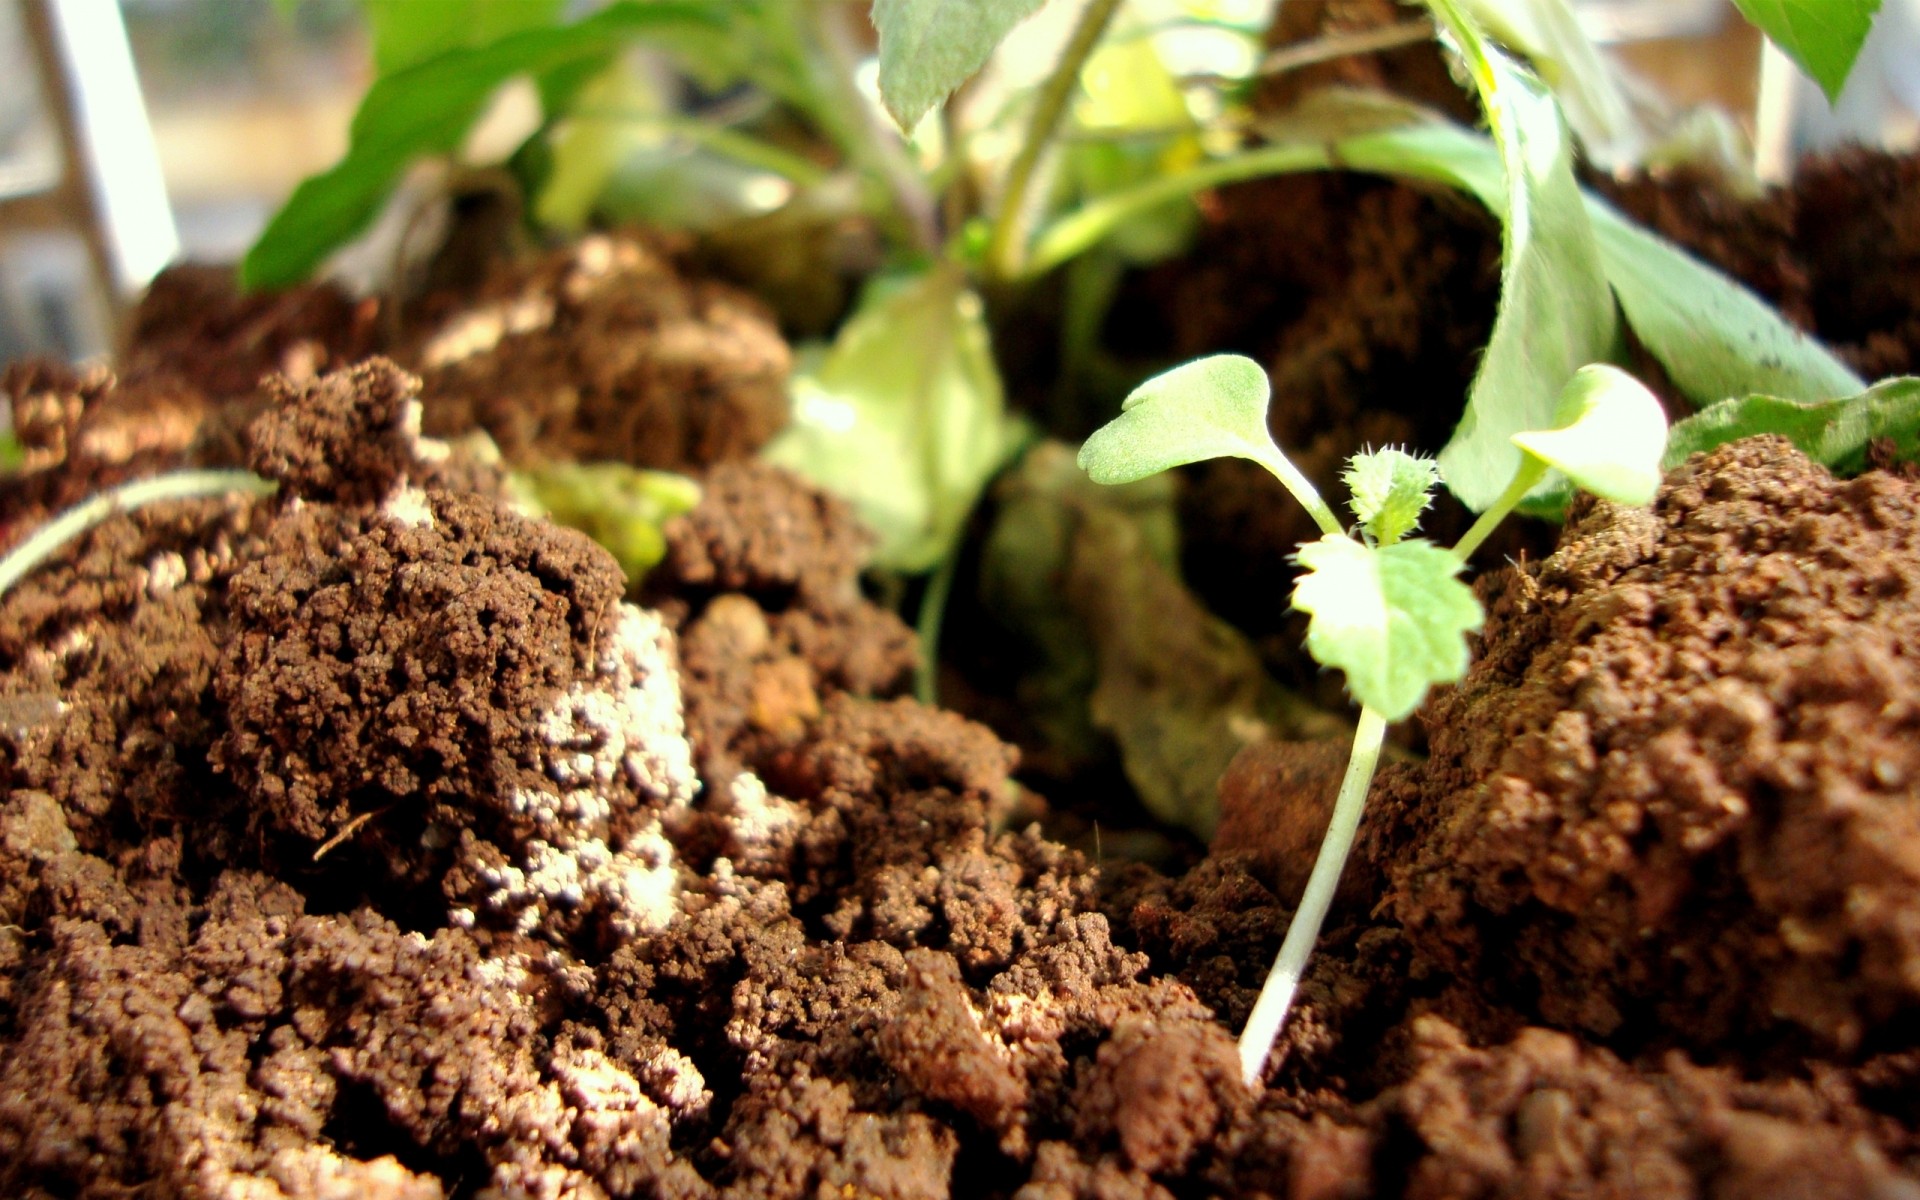 plants soil ball-shaped sprout ground agriculture compost little growth cultivation sapling environmental leaf bud flora root conservation ecology landscape